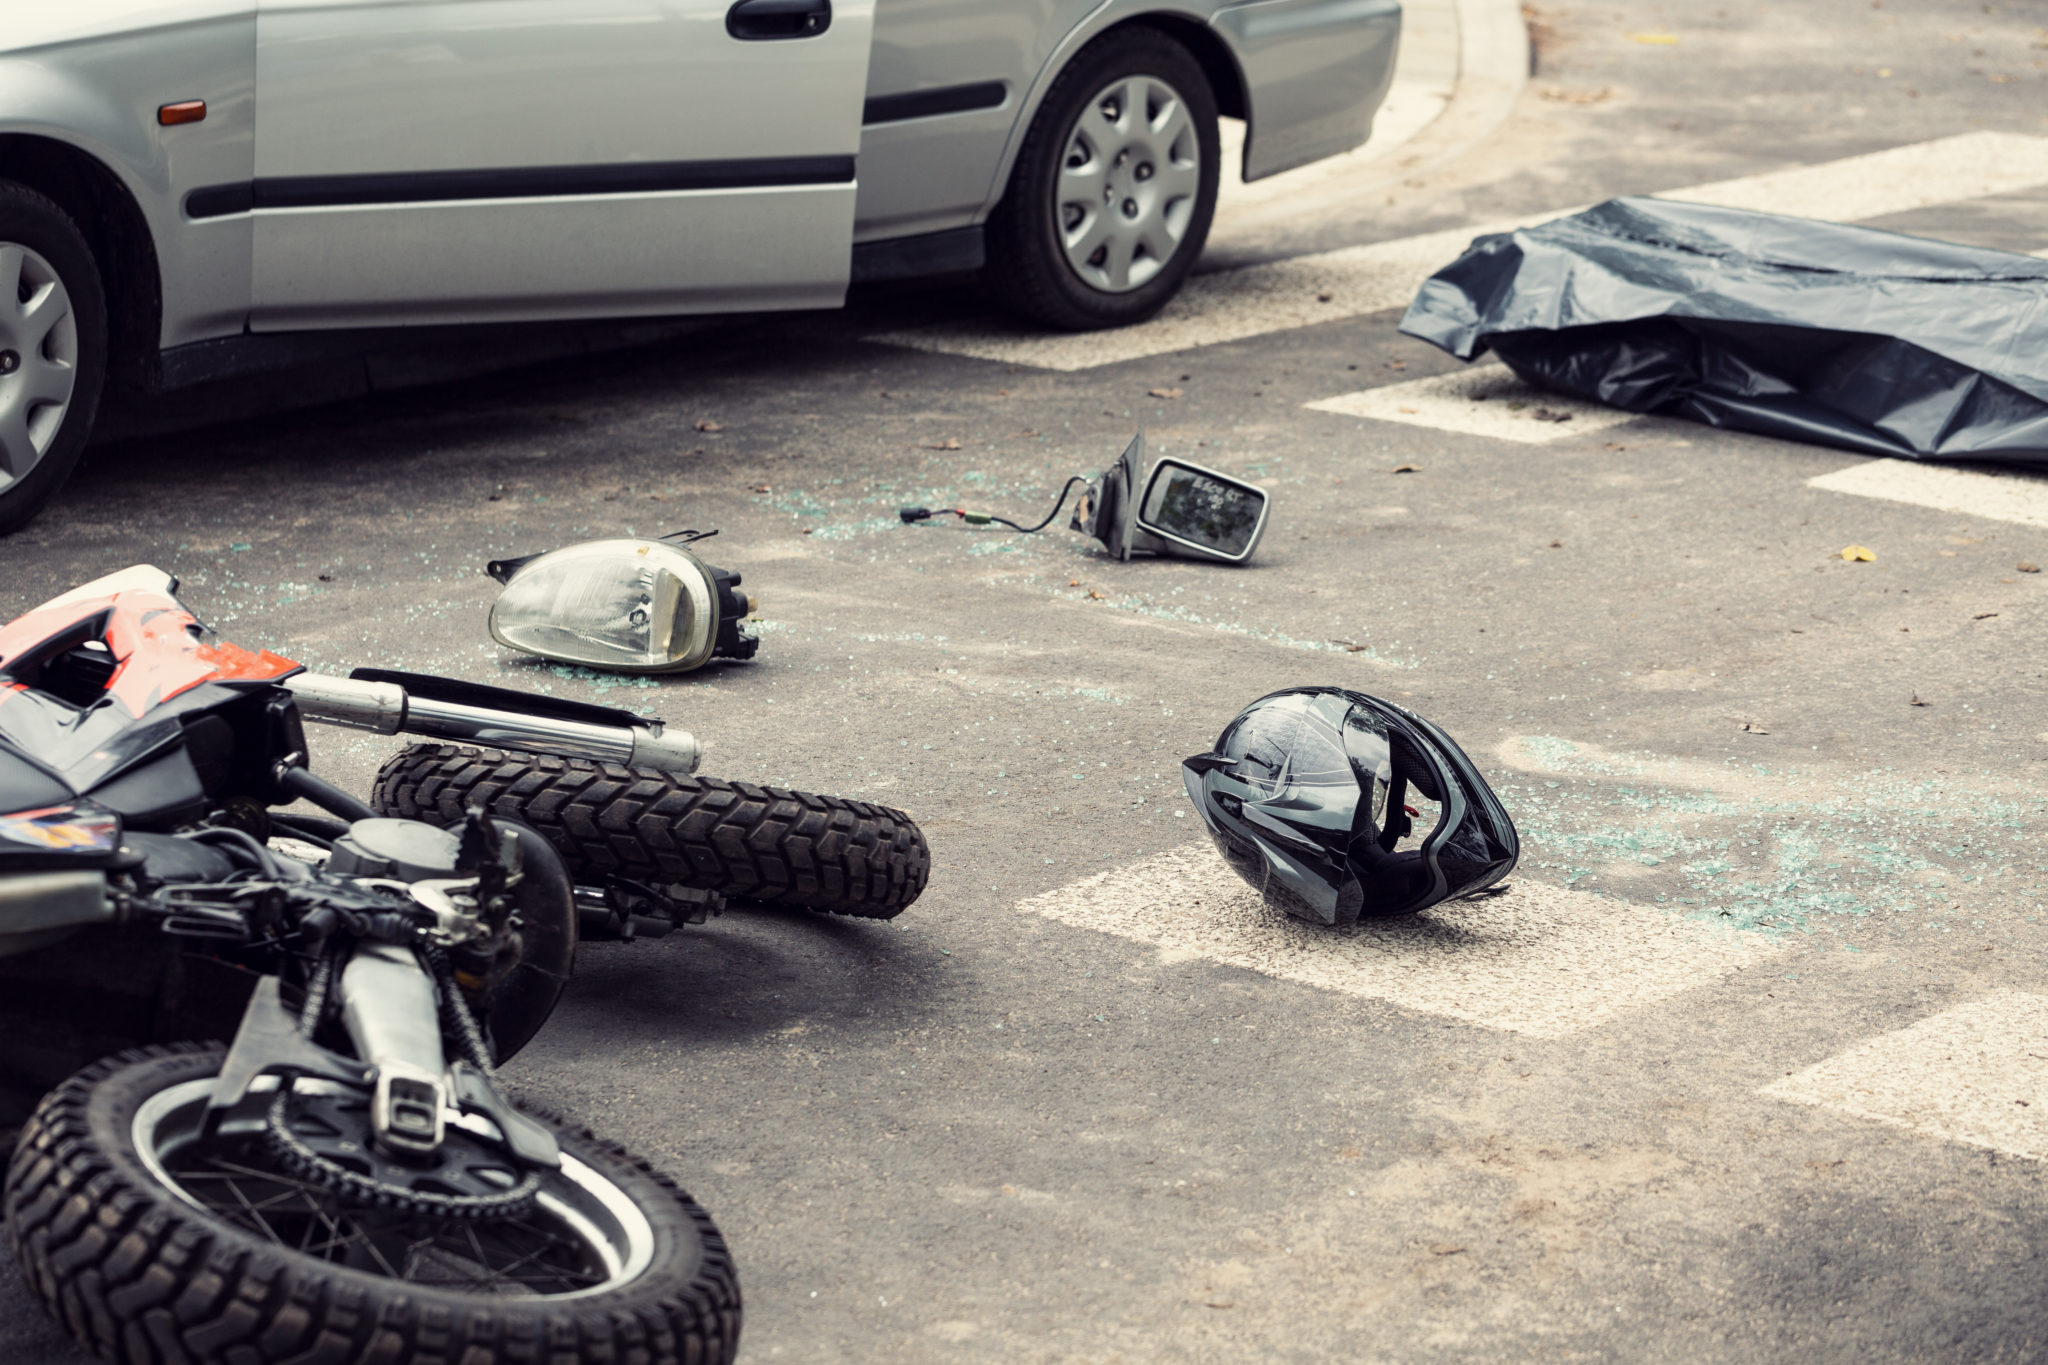 Driver Hits Motorcycle “Believed the Intersection to Be Clear”